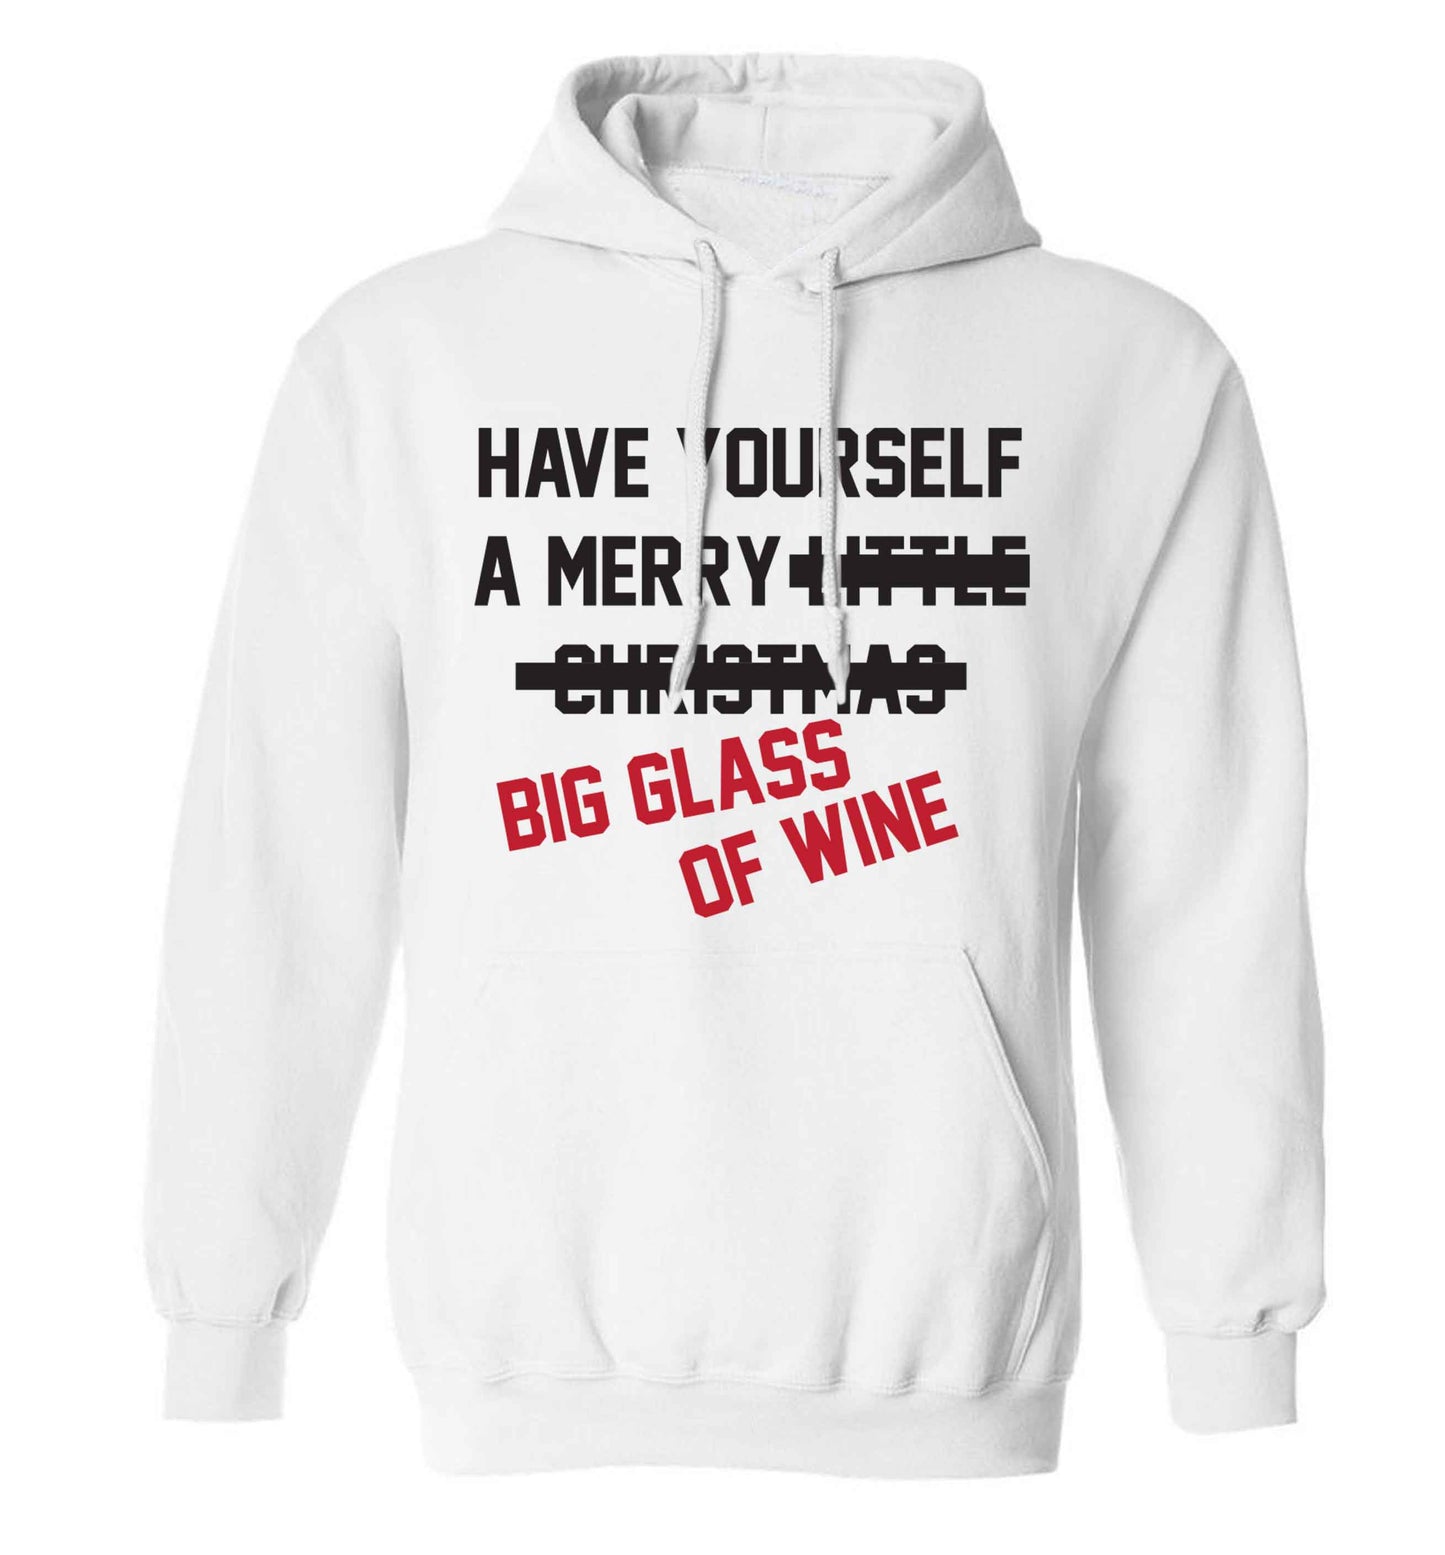 Have yourself a merry big glass of wine adults unisex white hoodie 2XL